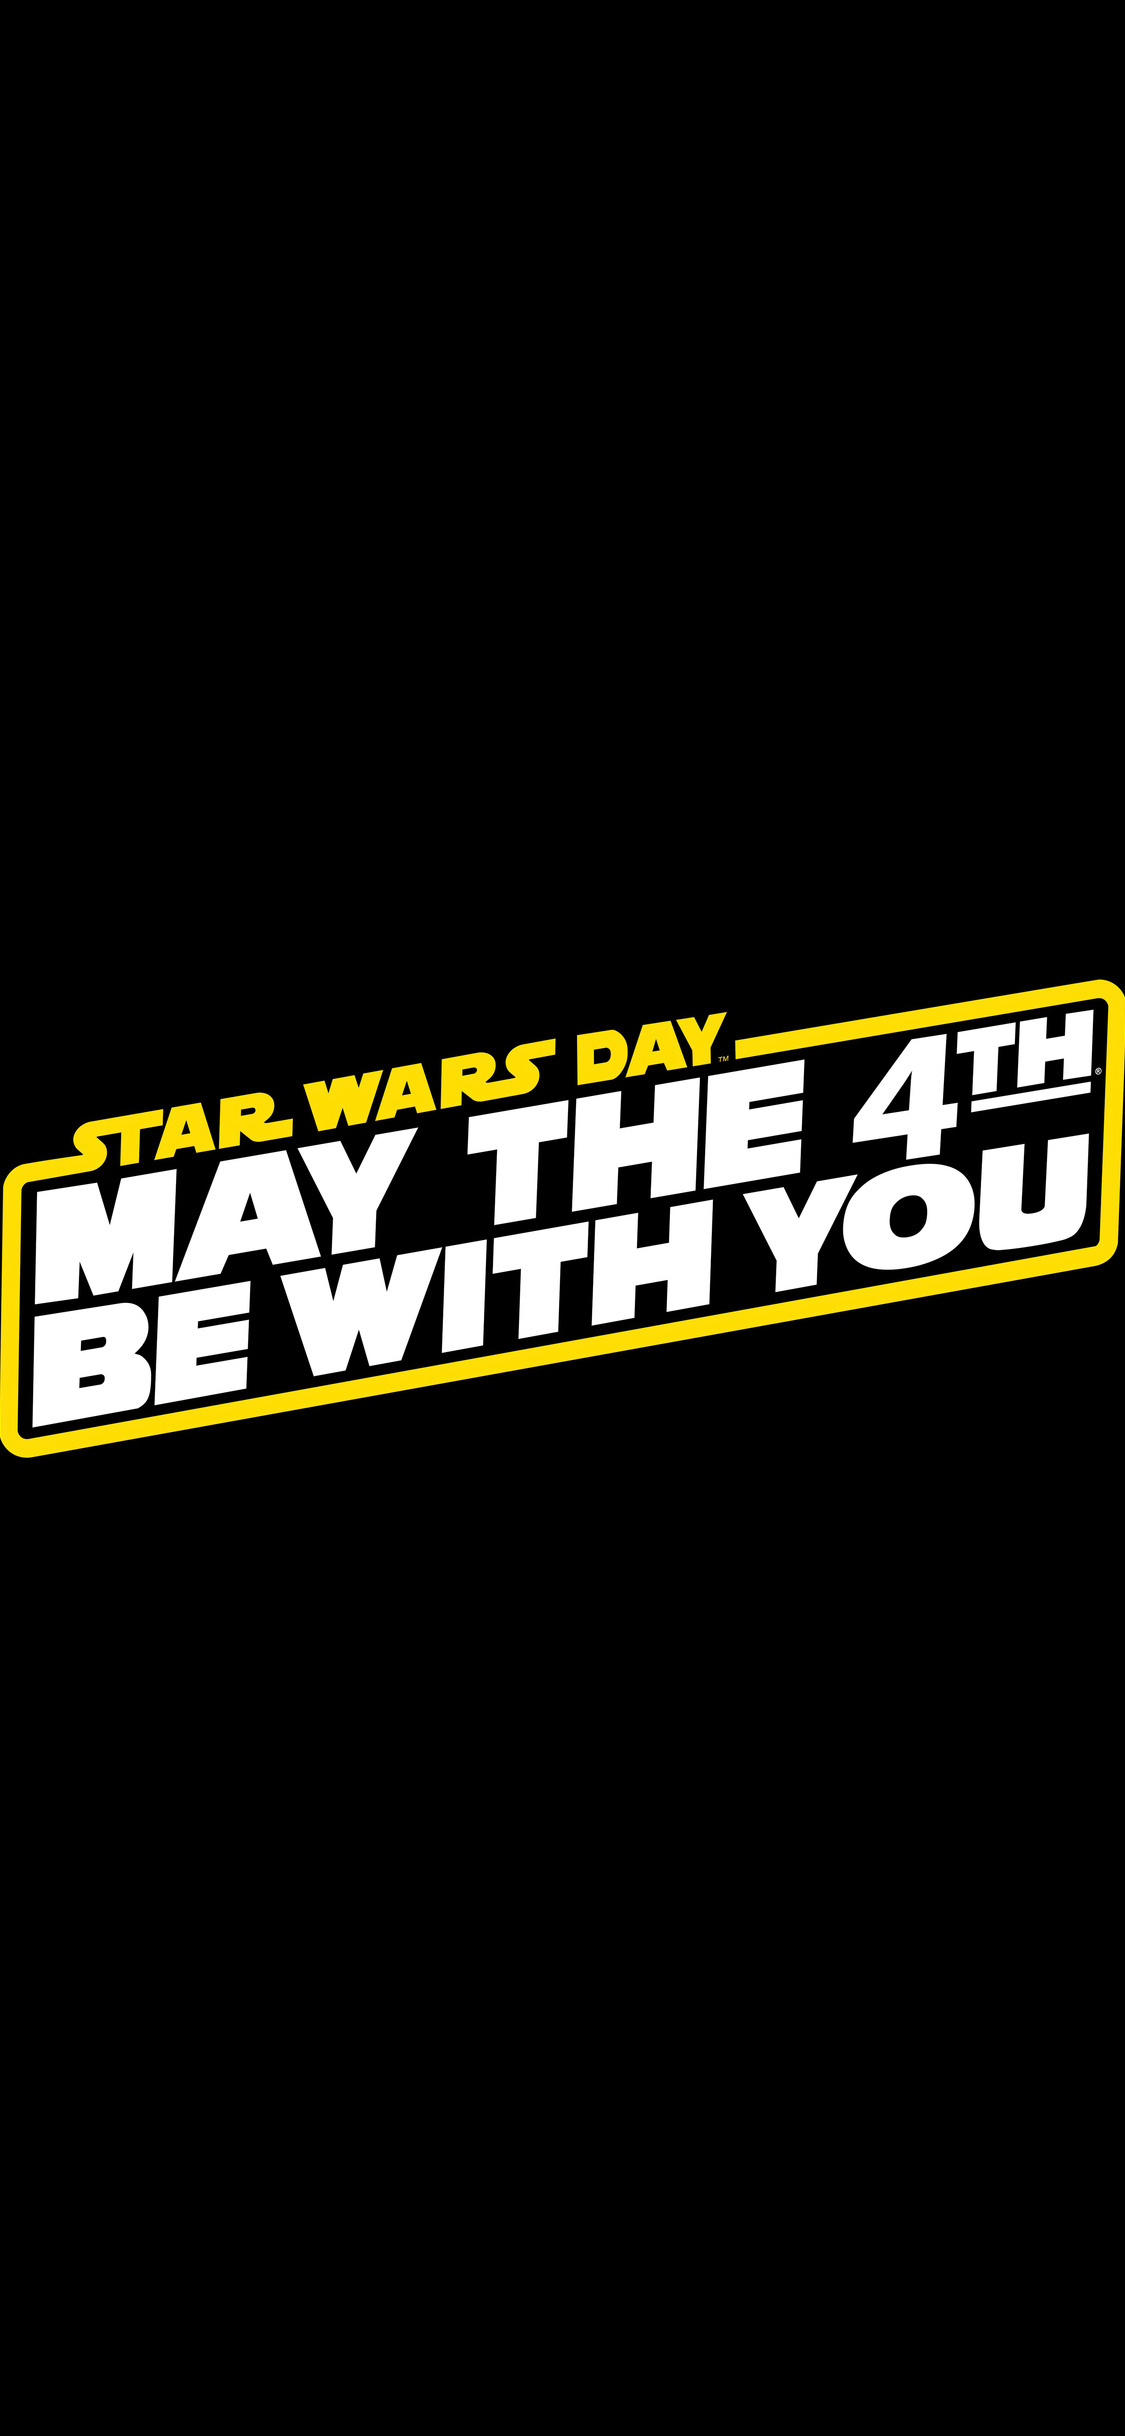 HD wallpaper, Phone Hd May The 4Th Star Wars Day Wallpaper Image, Iphone Xs Wallpapers, May The 4Th Be With You, 1130X2440 Hd Phone, Hd 4K Backgrounds, Star Wars Themed